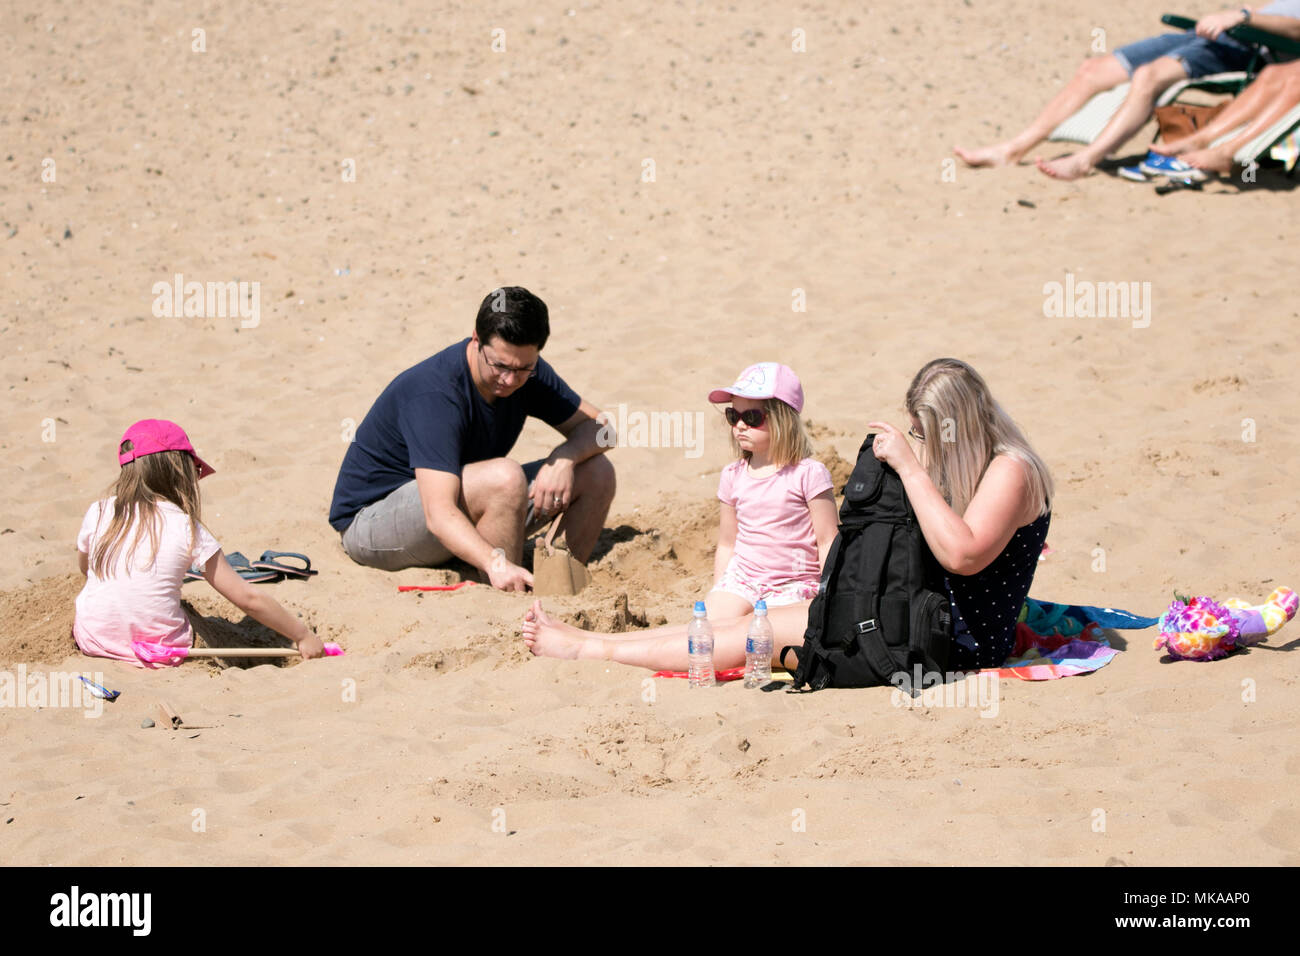 Lytham, St. Annes, Lancashire. 7th May 2018. Families hit the seaside, UK Weather.  Families hit the beach for a great day out and some fun in the sun on the golden sands of the traditional seaside resort of Lytham St. Annes on the Lancashire coastline.  Credit: Cernan Elias/Alamy Live News Stock Photo